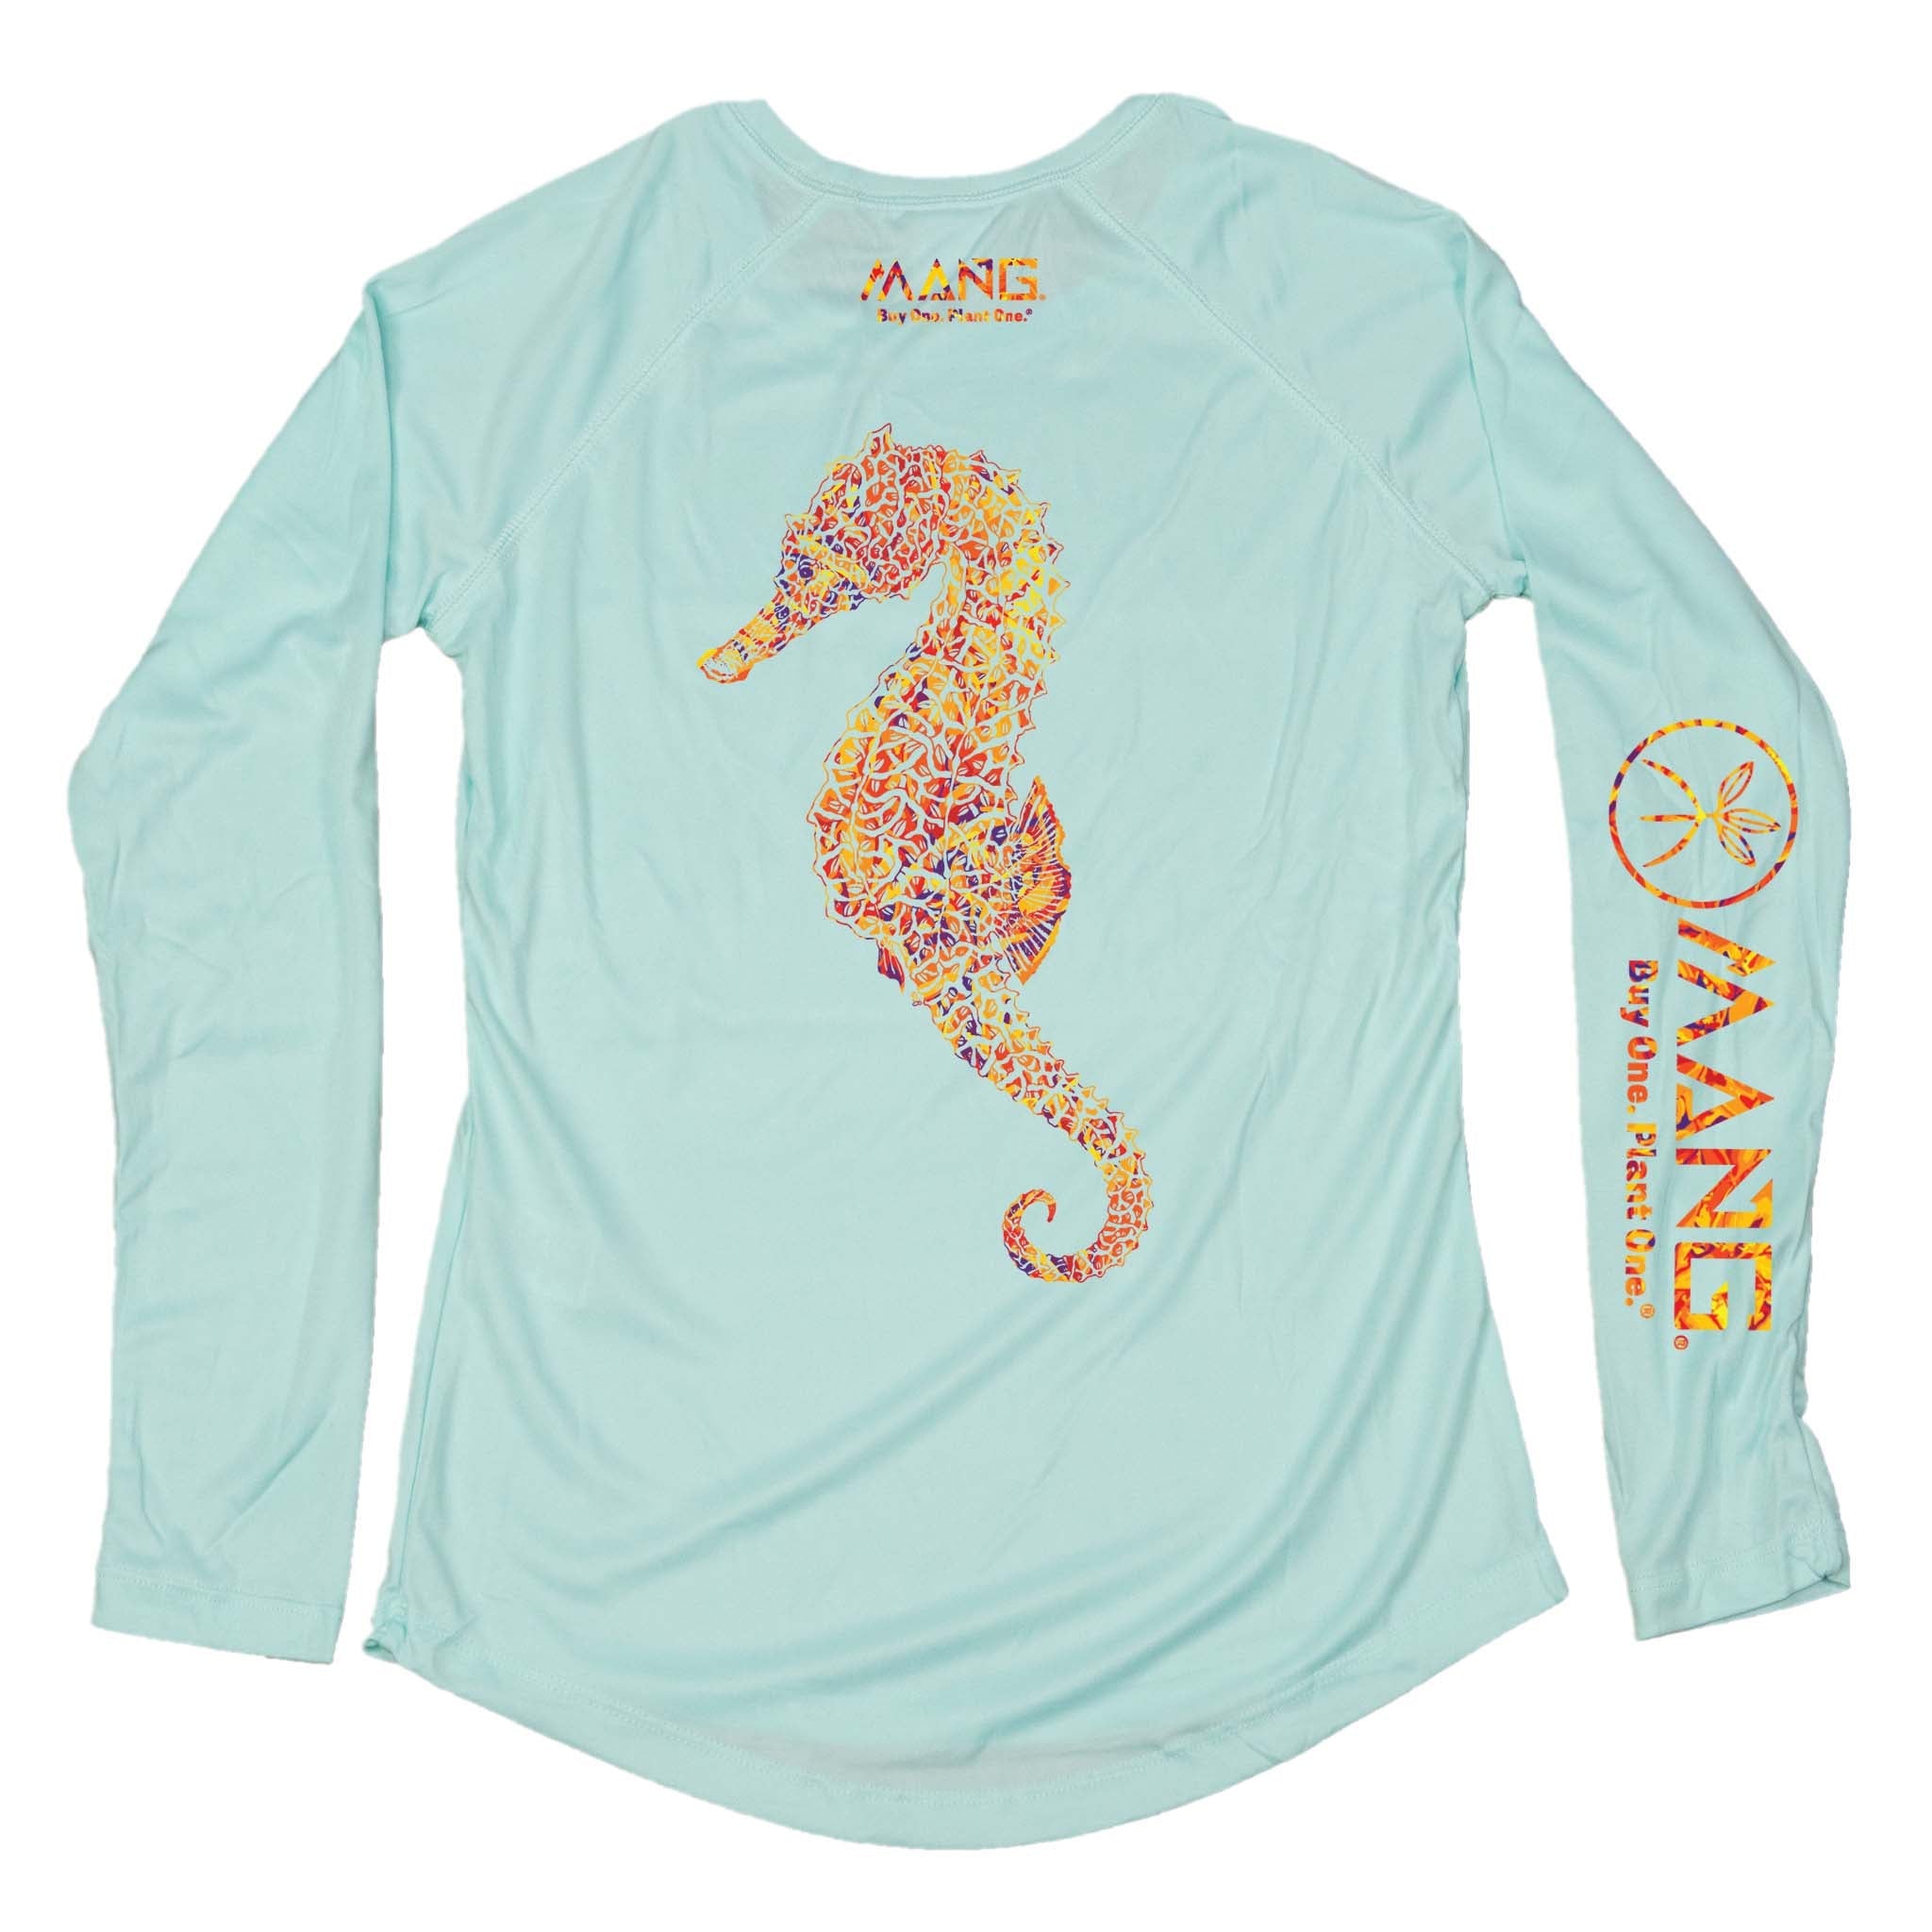 Mang Womens Performance LS Lycra Seahorse Seagrass S